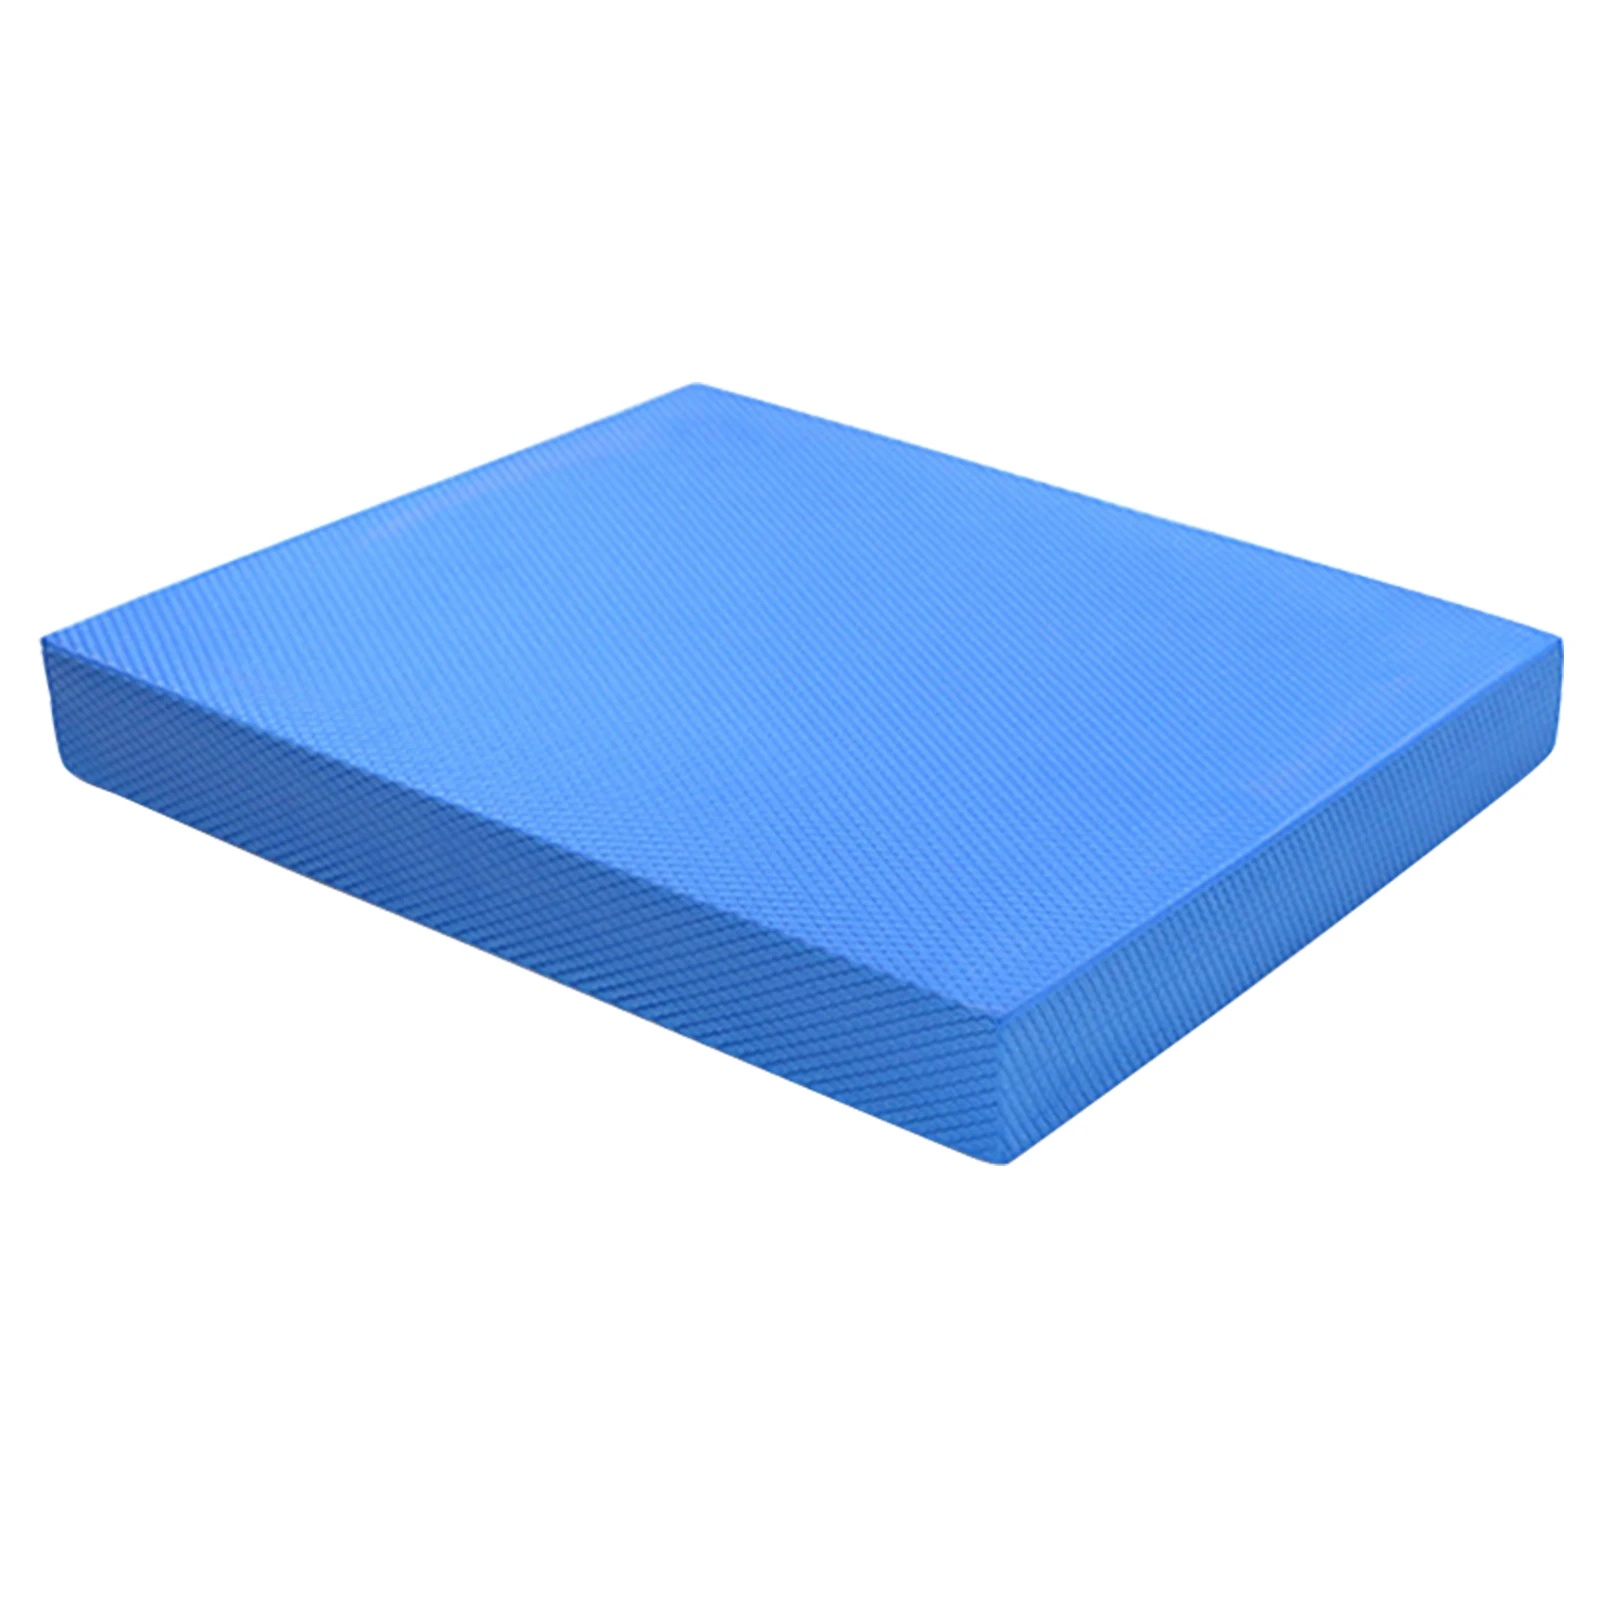 

Ankle Knee For Physical Therapy Travel Fitness Exercise Mat Soft TPE Rehabilitation Balance Foam Pad Yoga Gym Strength Training